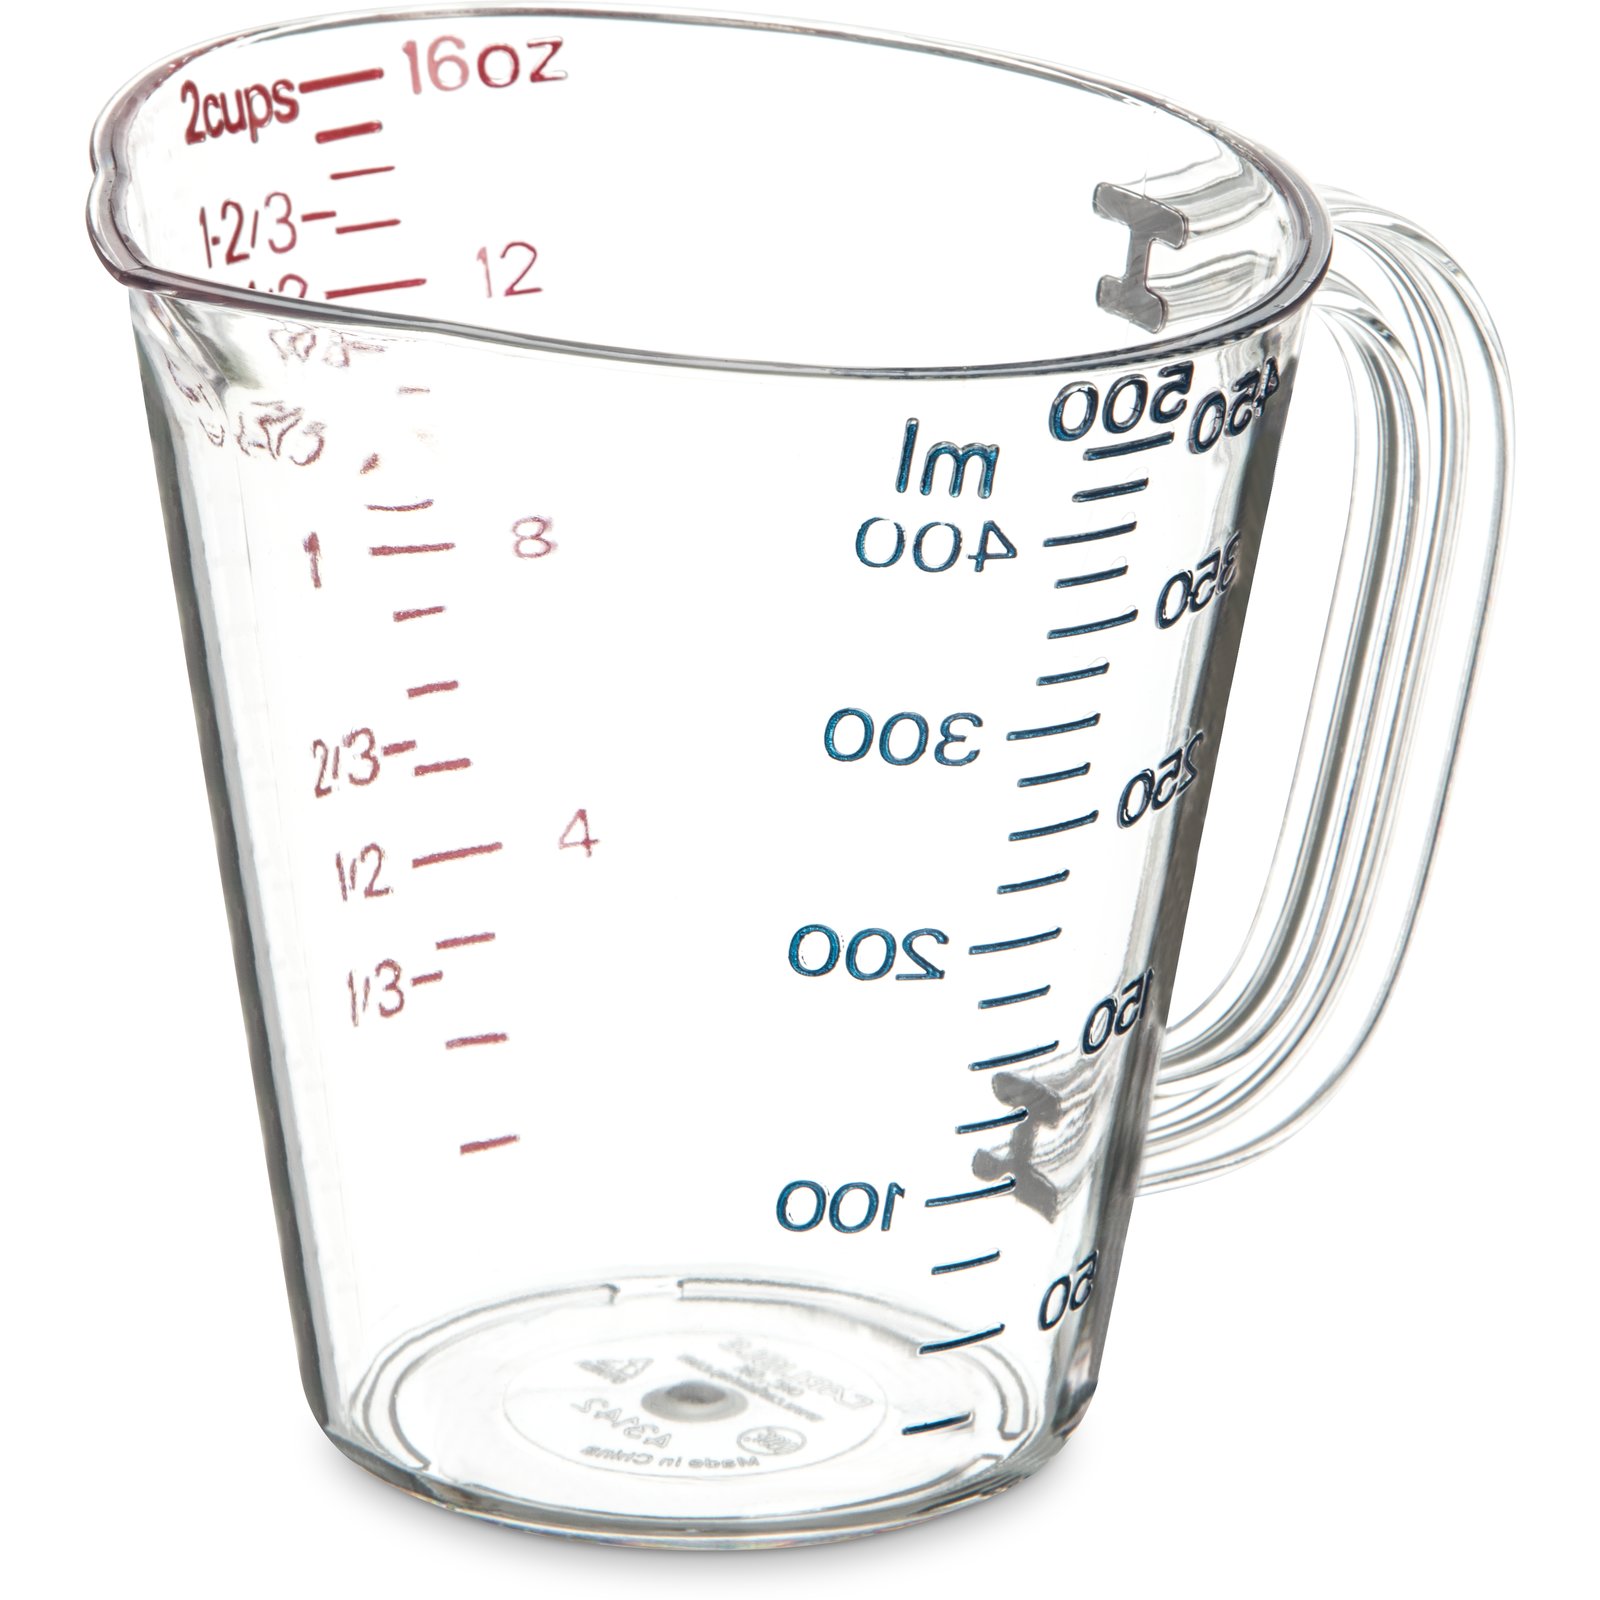 Measuring Cup, 1 cup (0.25 liter) capacity, printed with US/metric  measurements, dishwasher safe